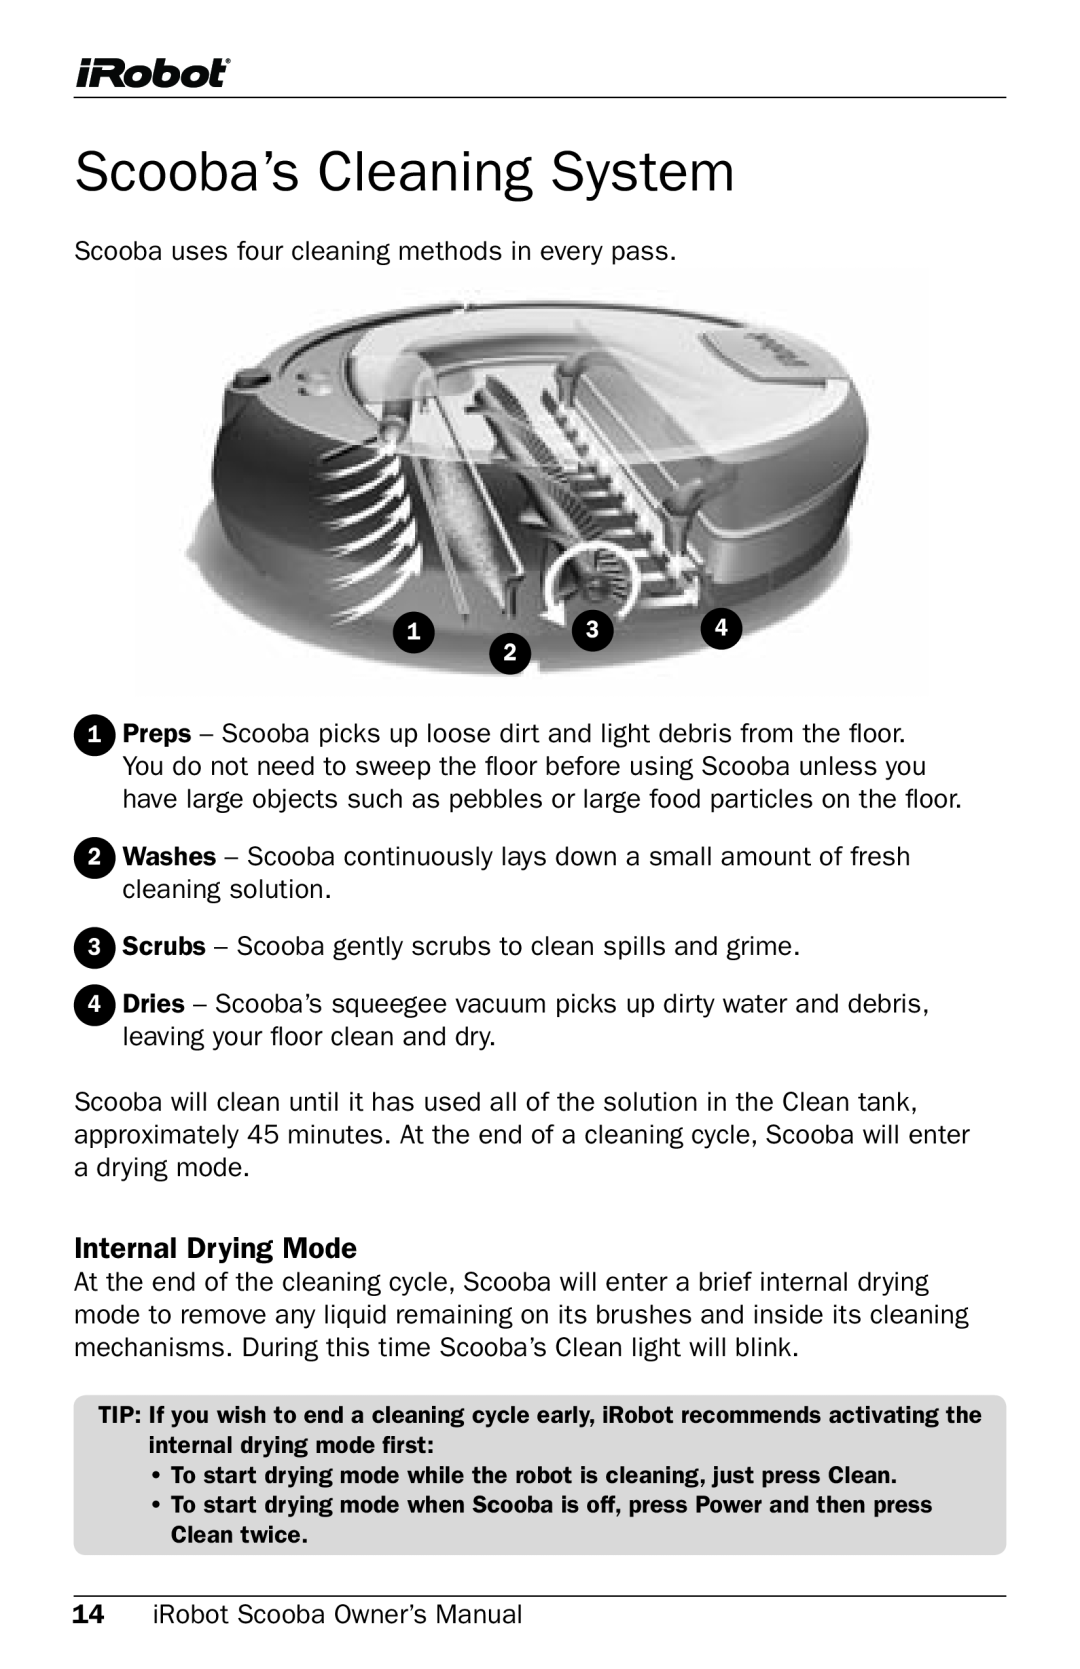 iRobot 5800 owner manual Scooba’s Cleaning System, Internal Drying Mode 